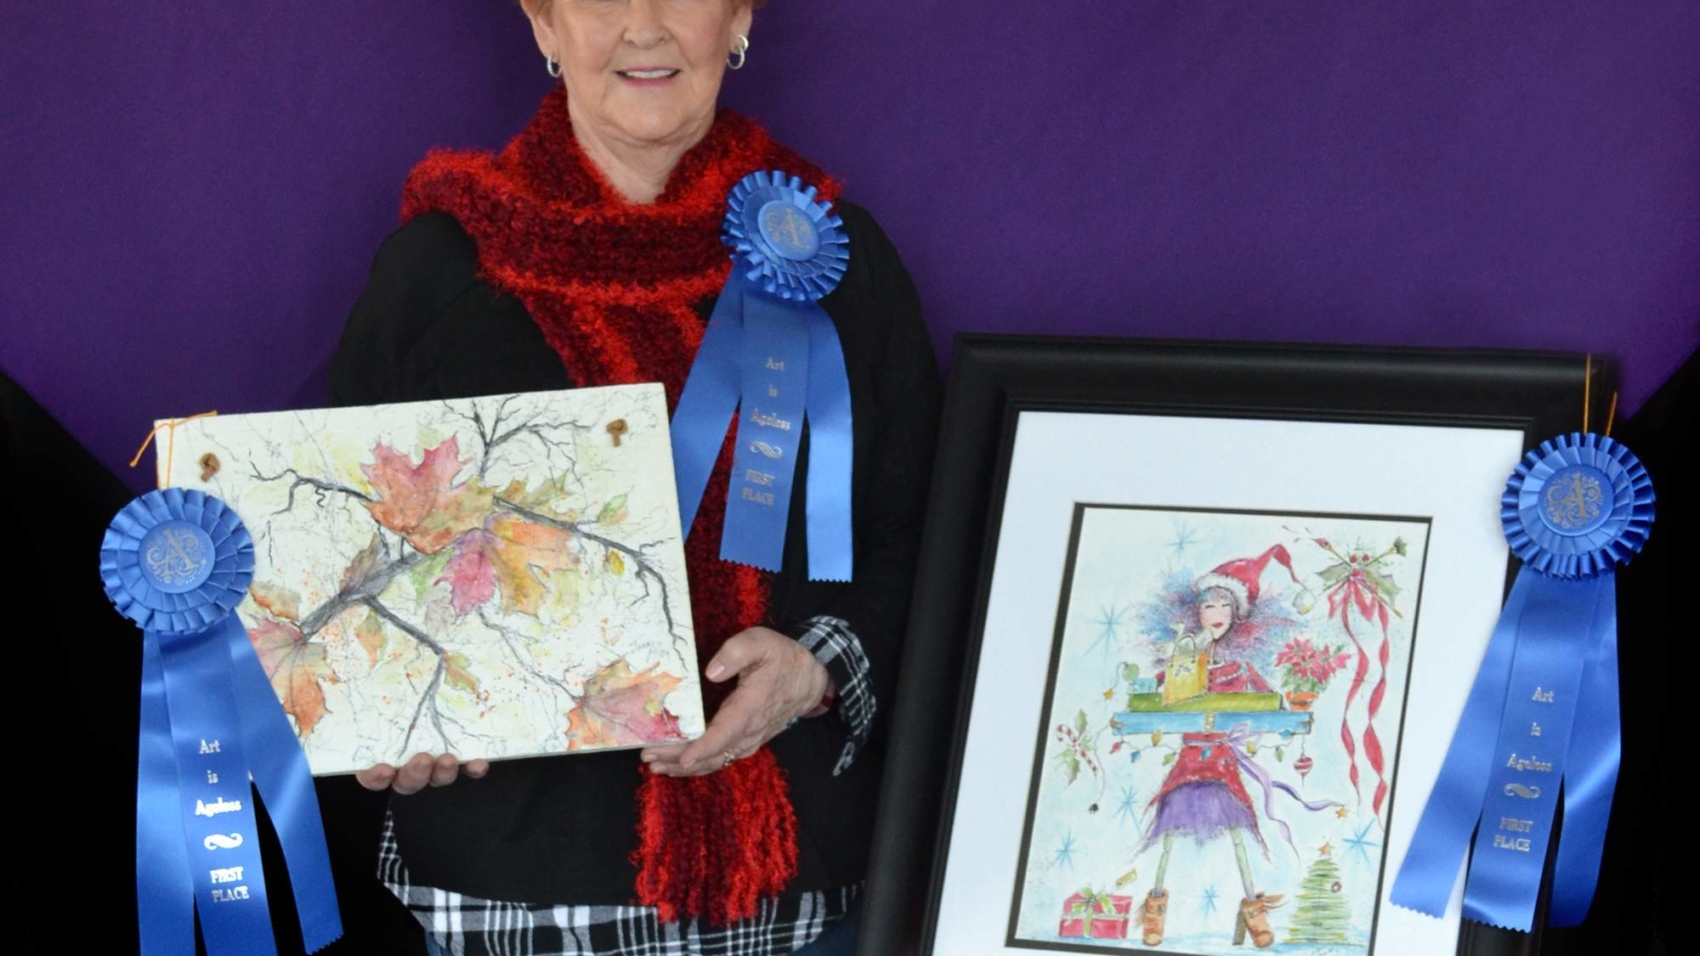 Joan Allen poses with her artwork, which won various categories in this year's Art is Ageless competition.